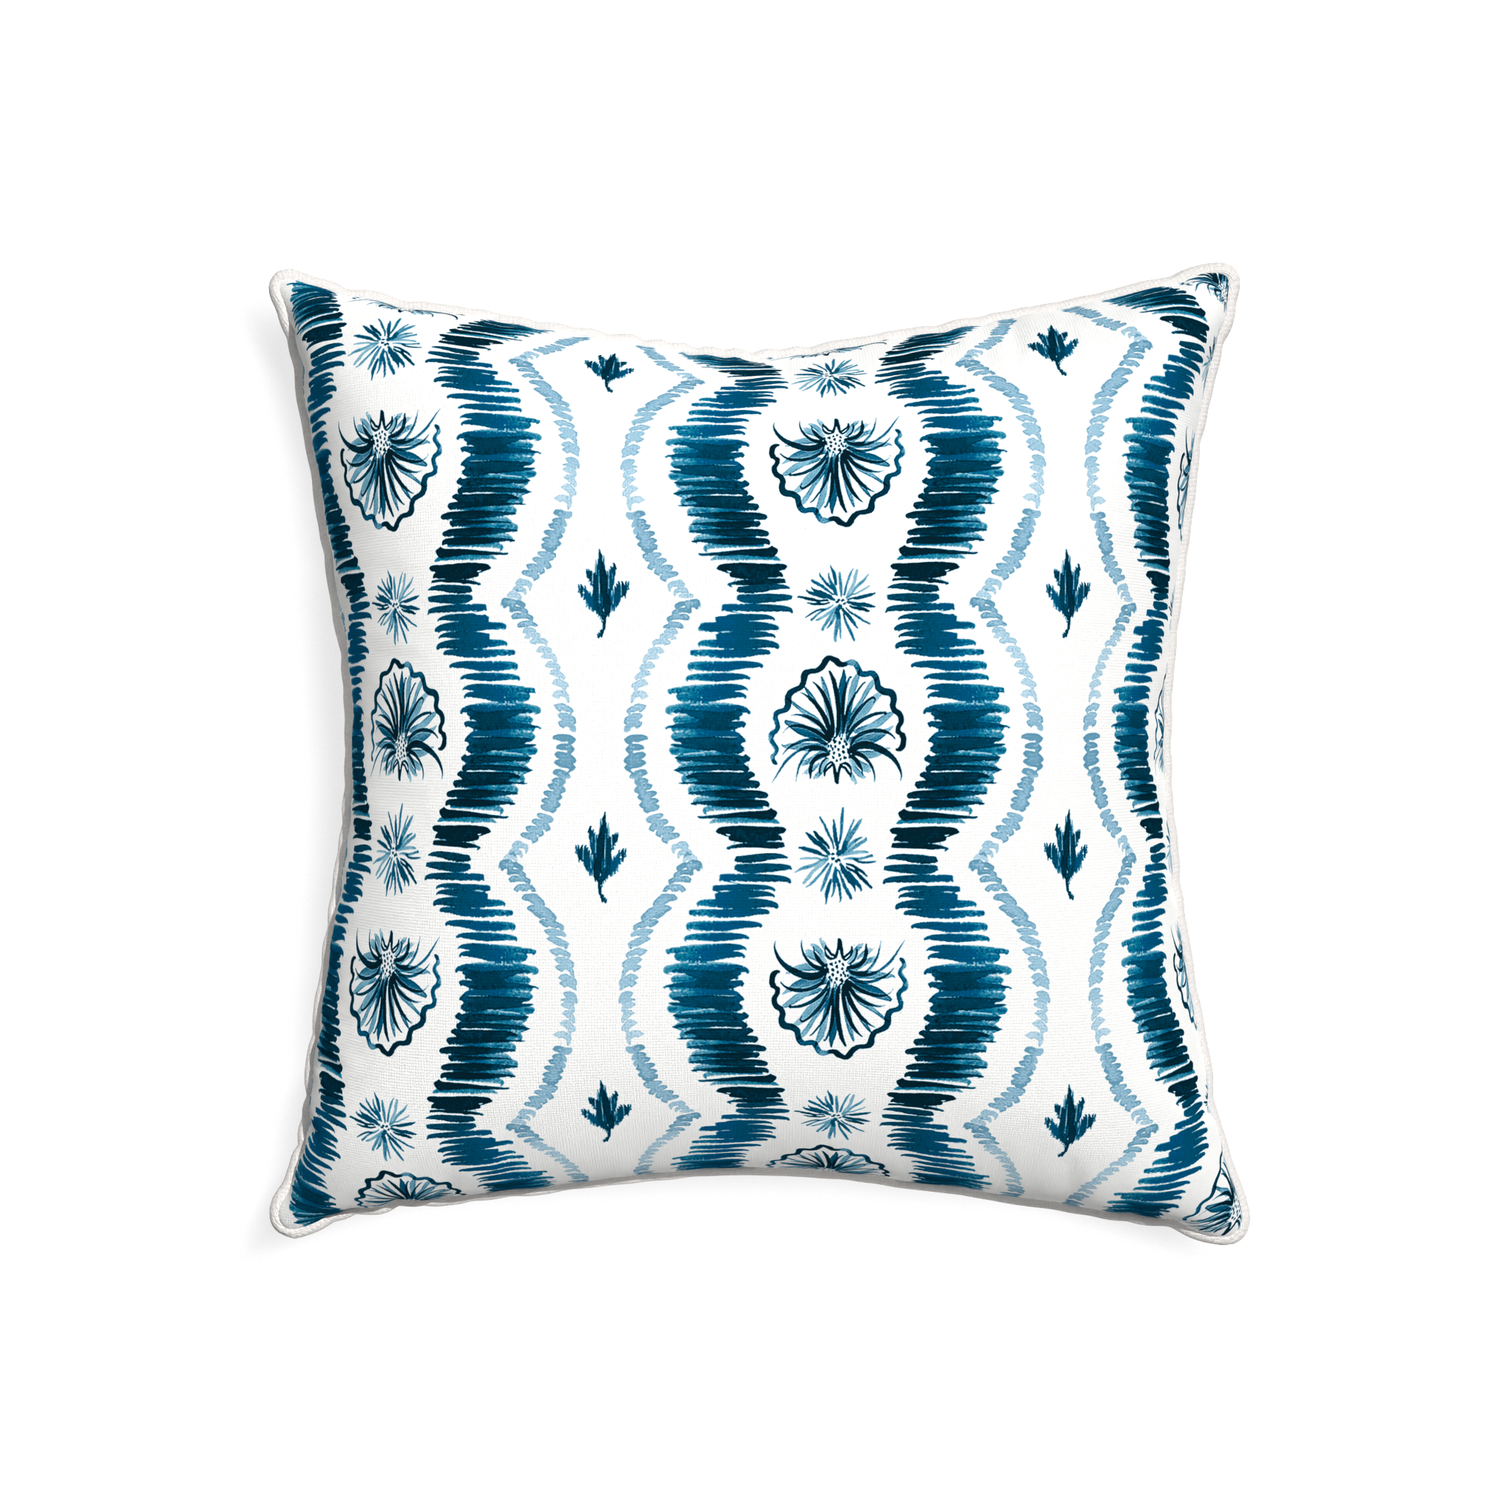 22-square alice custom blue ikatpillow with snow piping on white background